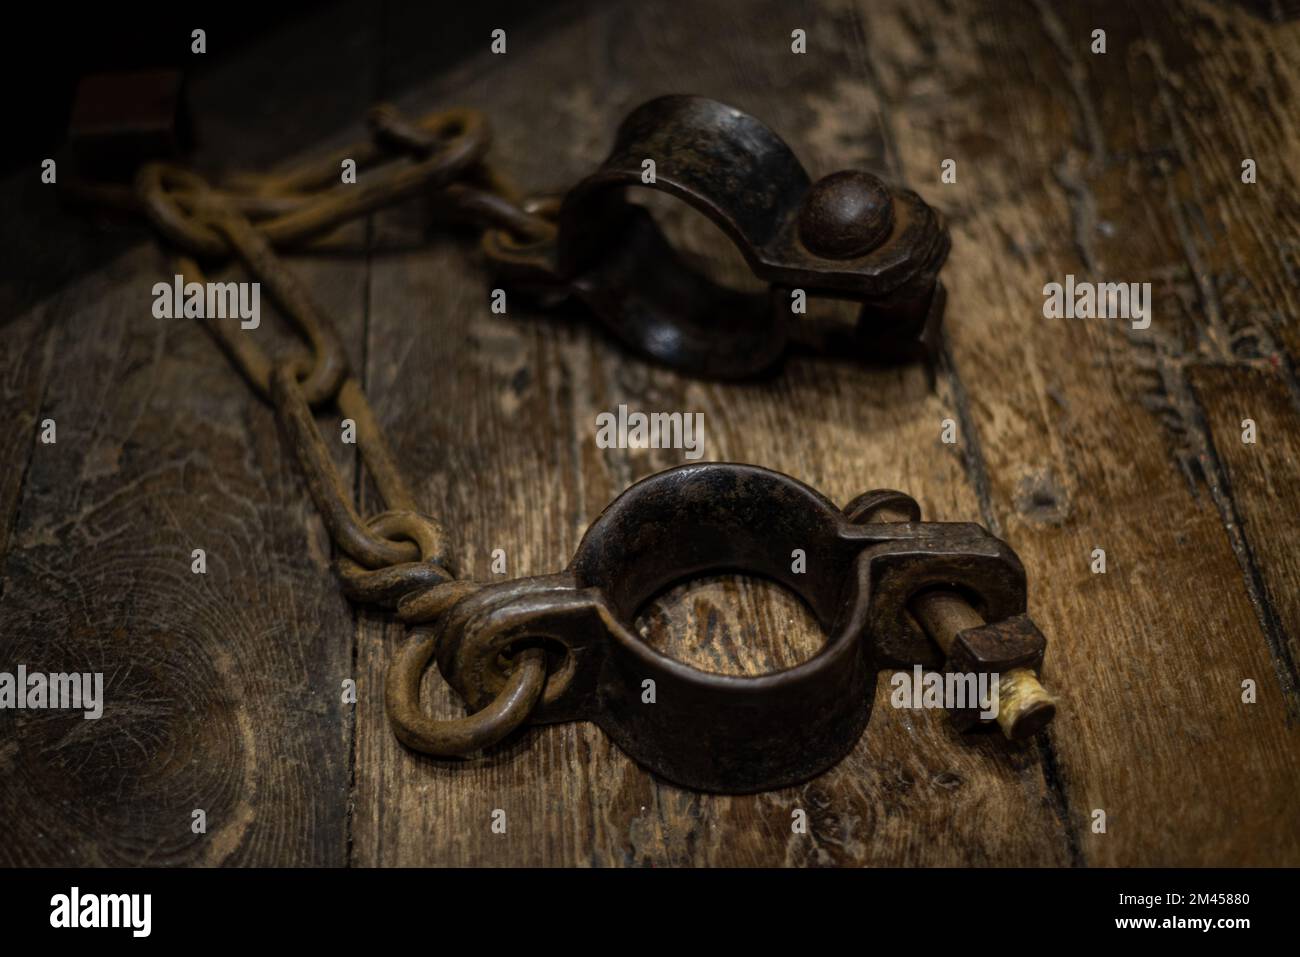 Ancient iron handcuffs on wooden floor from medieval times in England, prisoner wrist restraints. Stock Photo